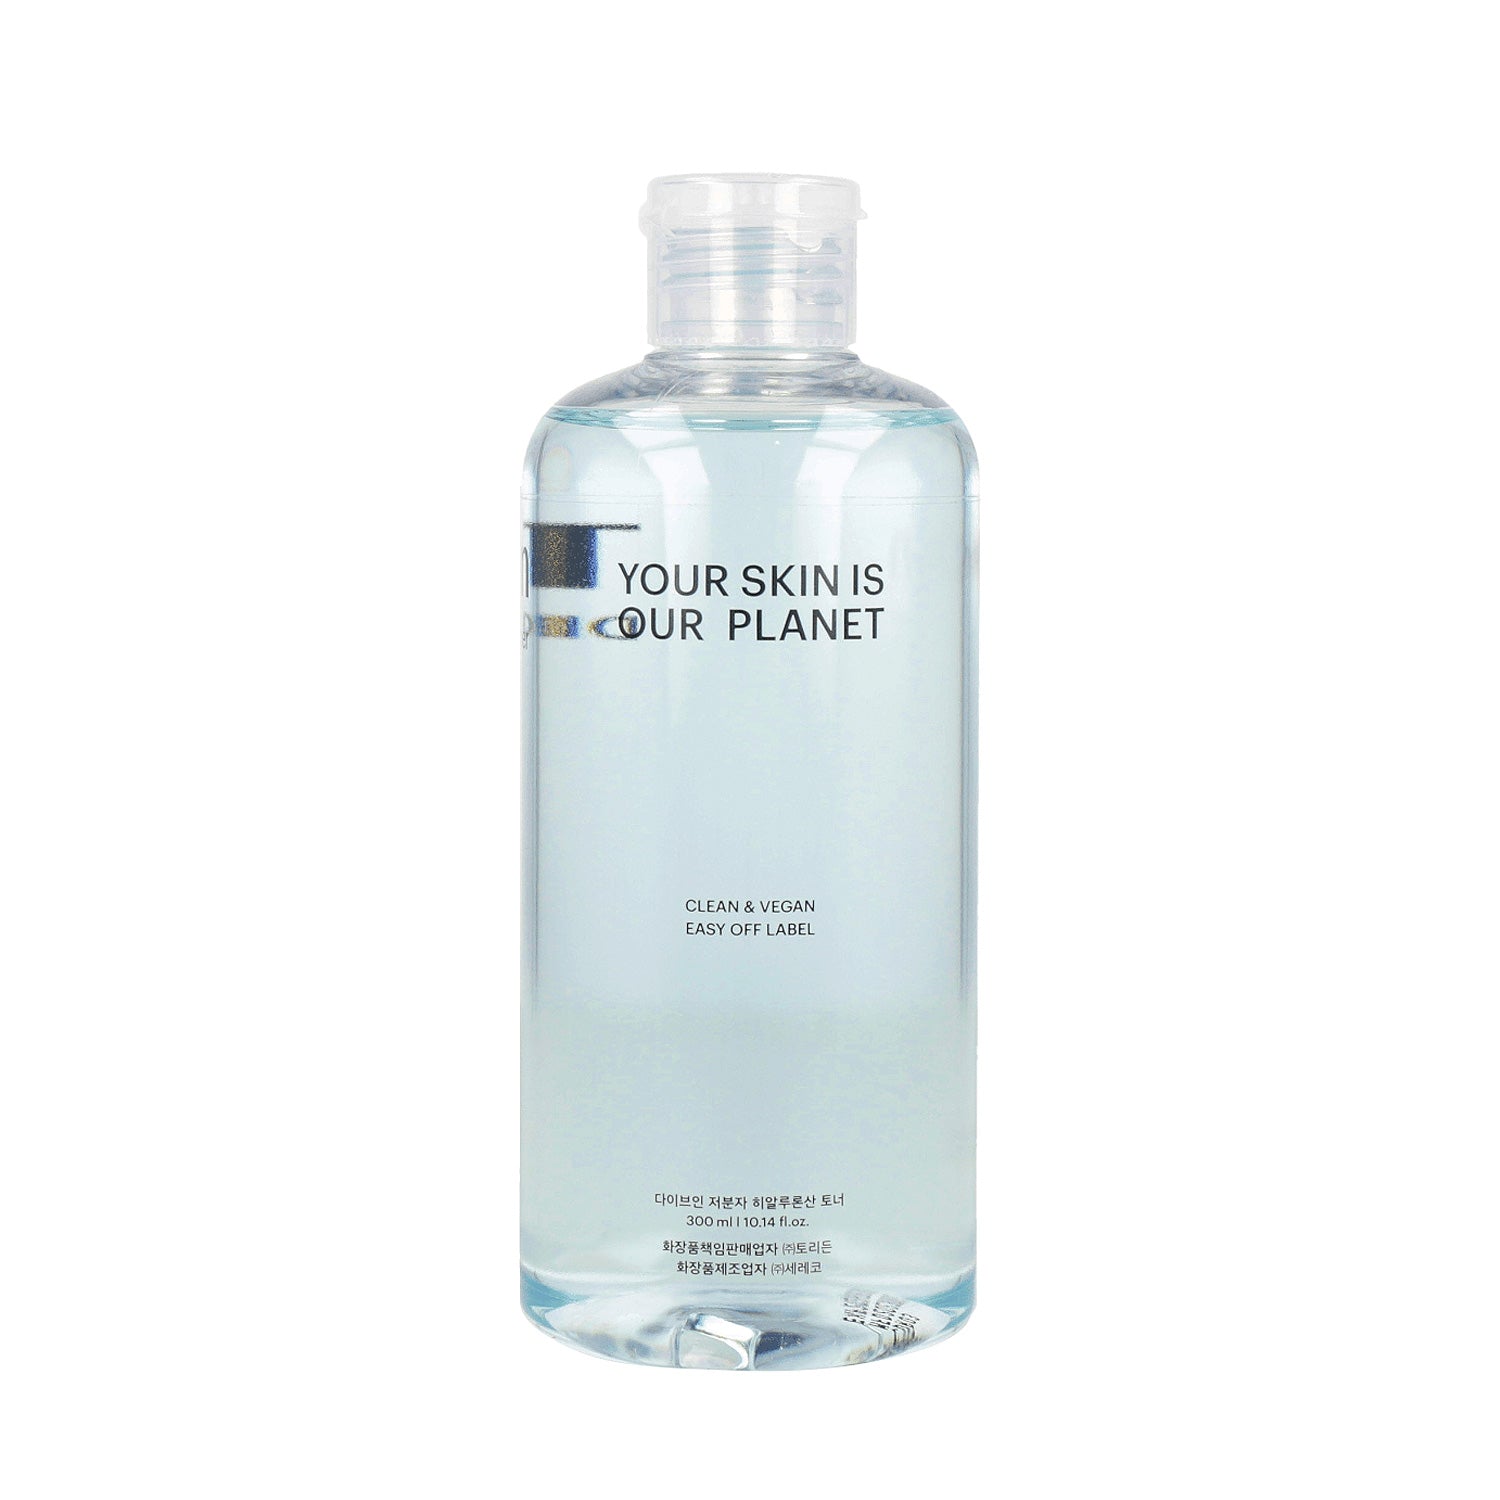 Provides long-lasting moisture to keep the skin plump and hydrated.